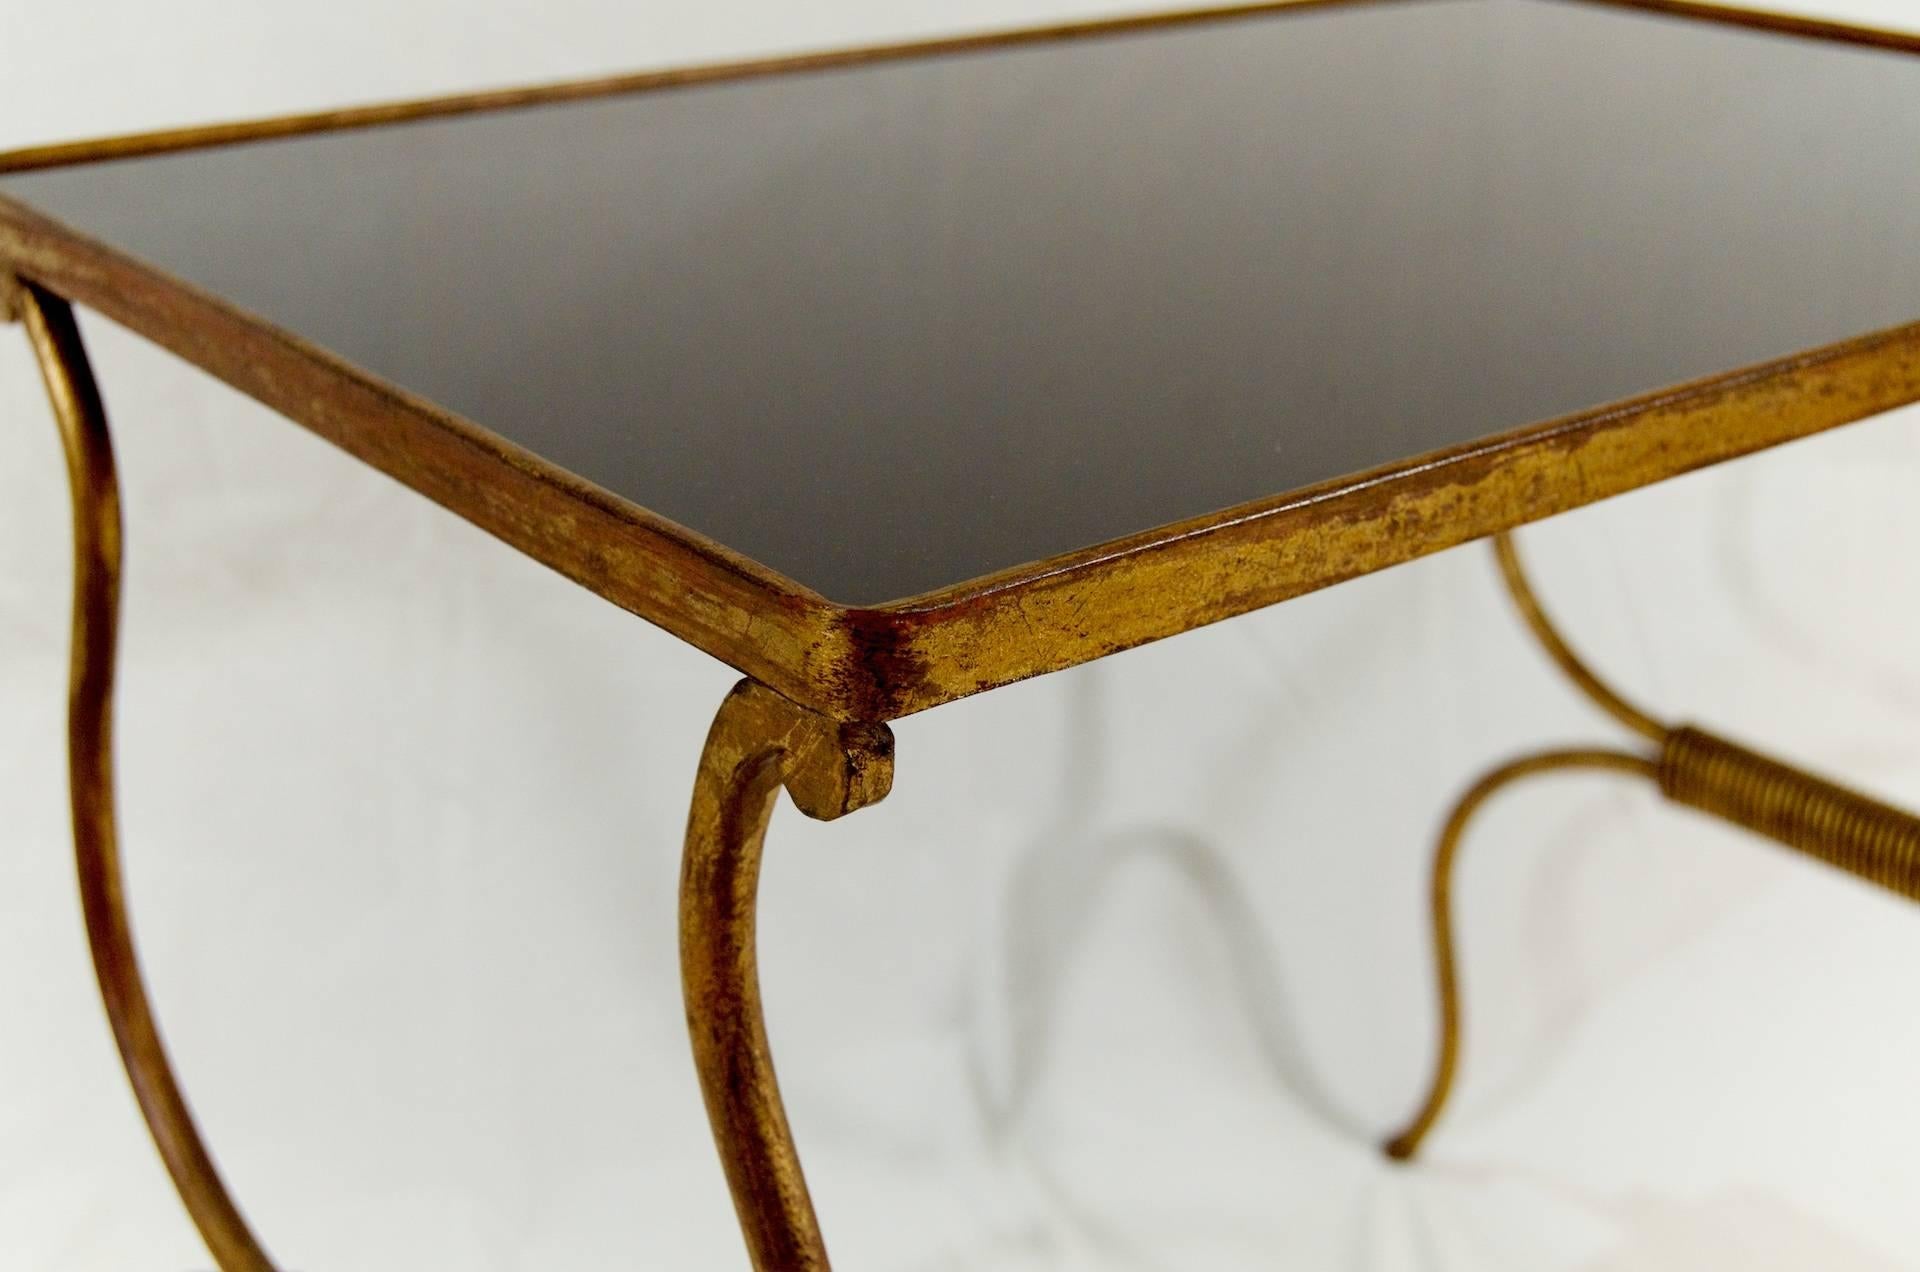 Italian Gilt Painted Wrought Iron Occasional Table with Black Glass Top